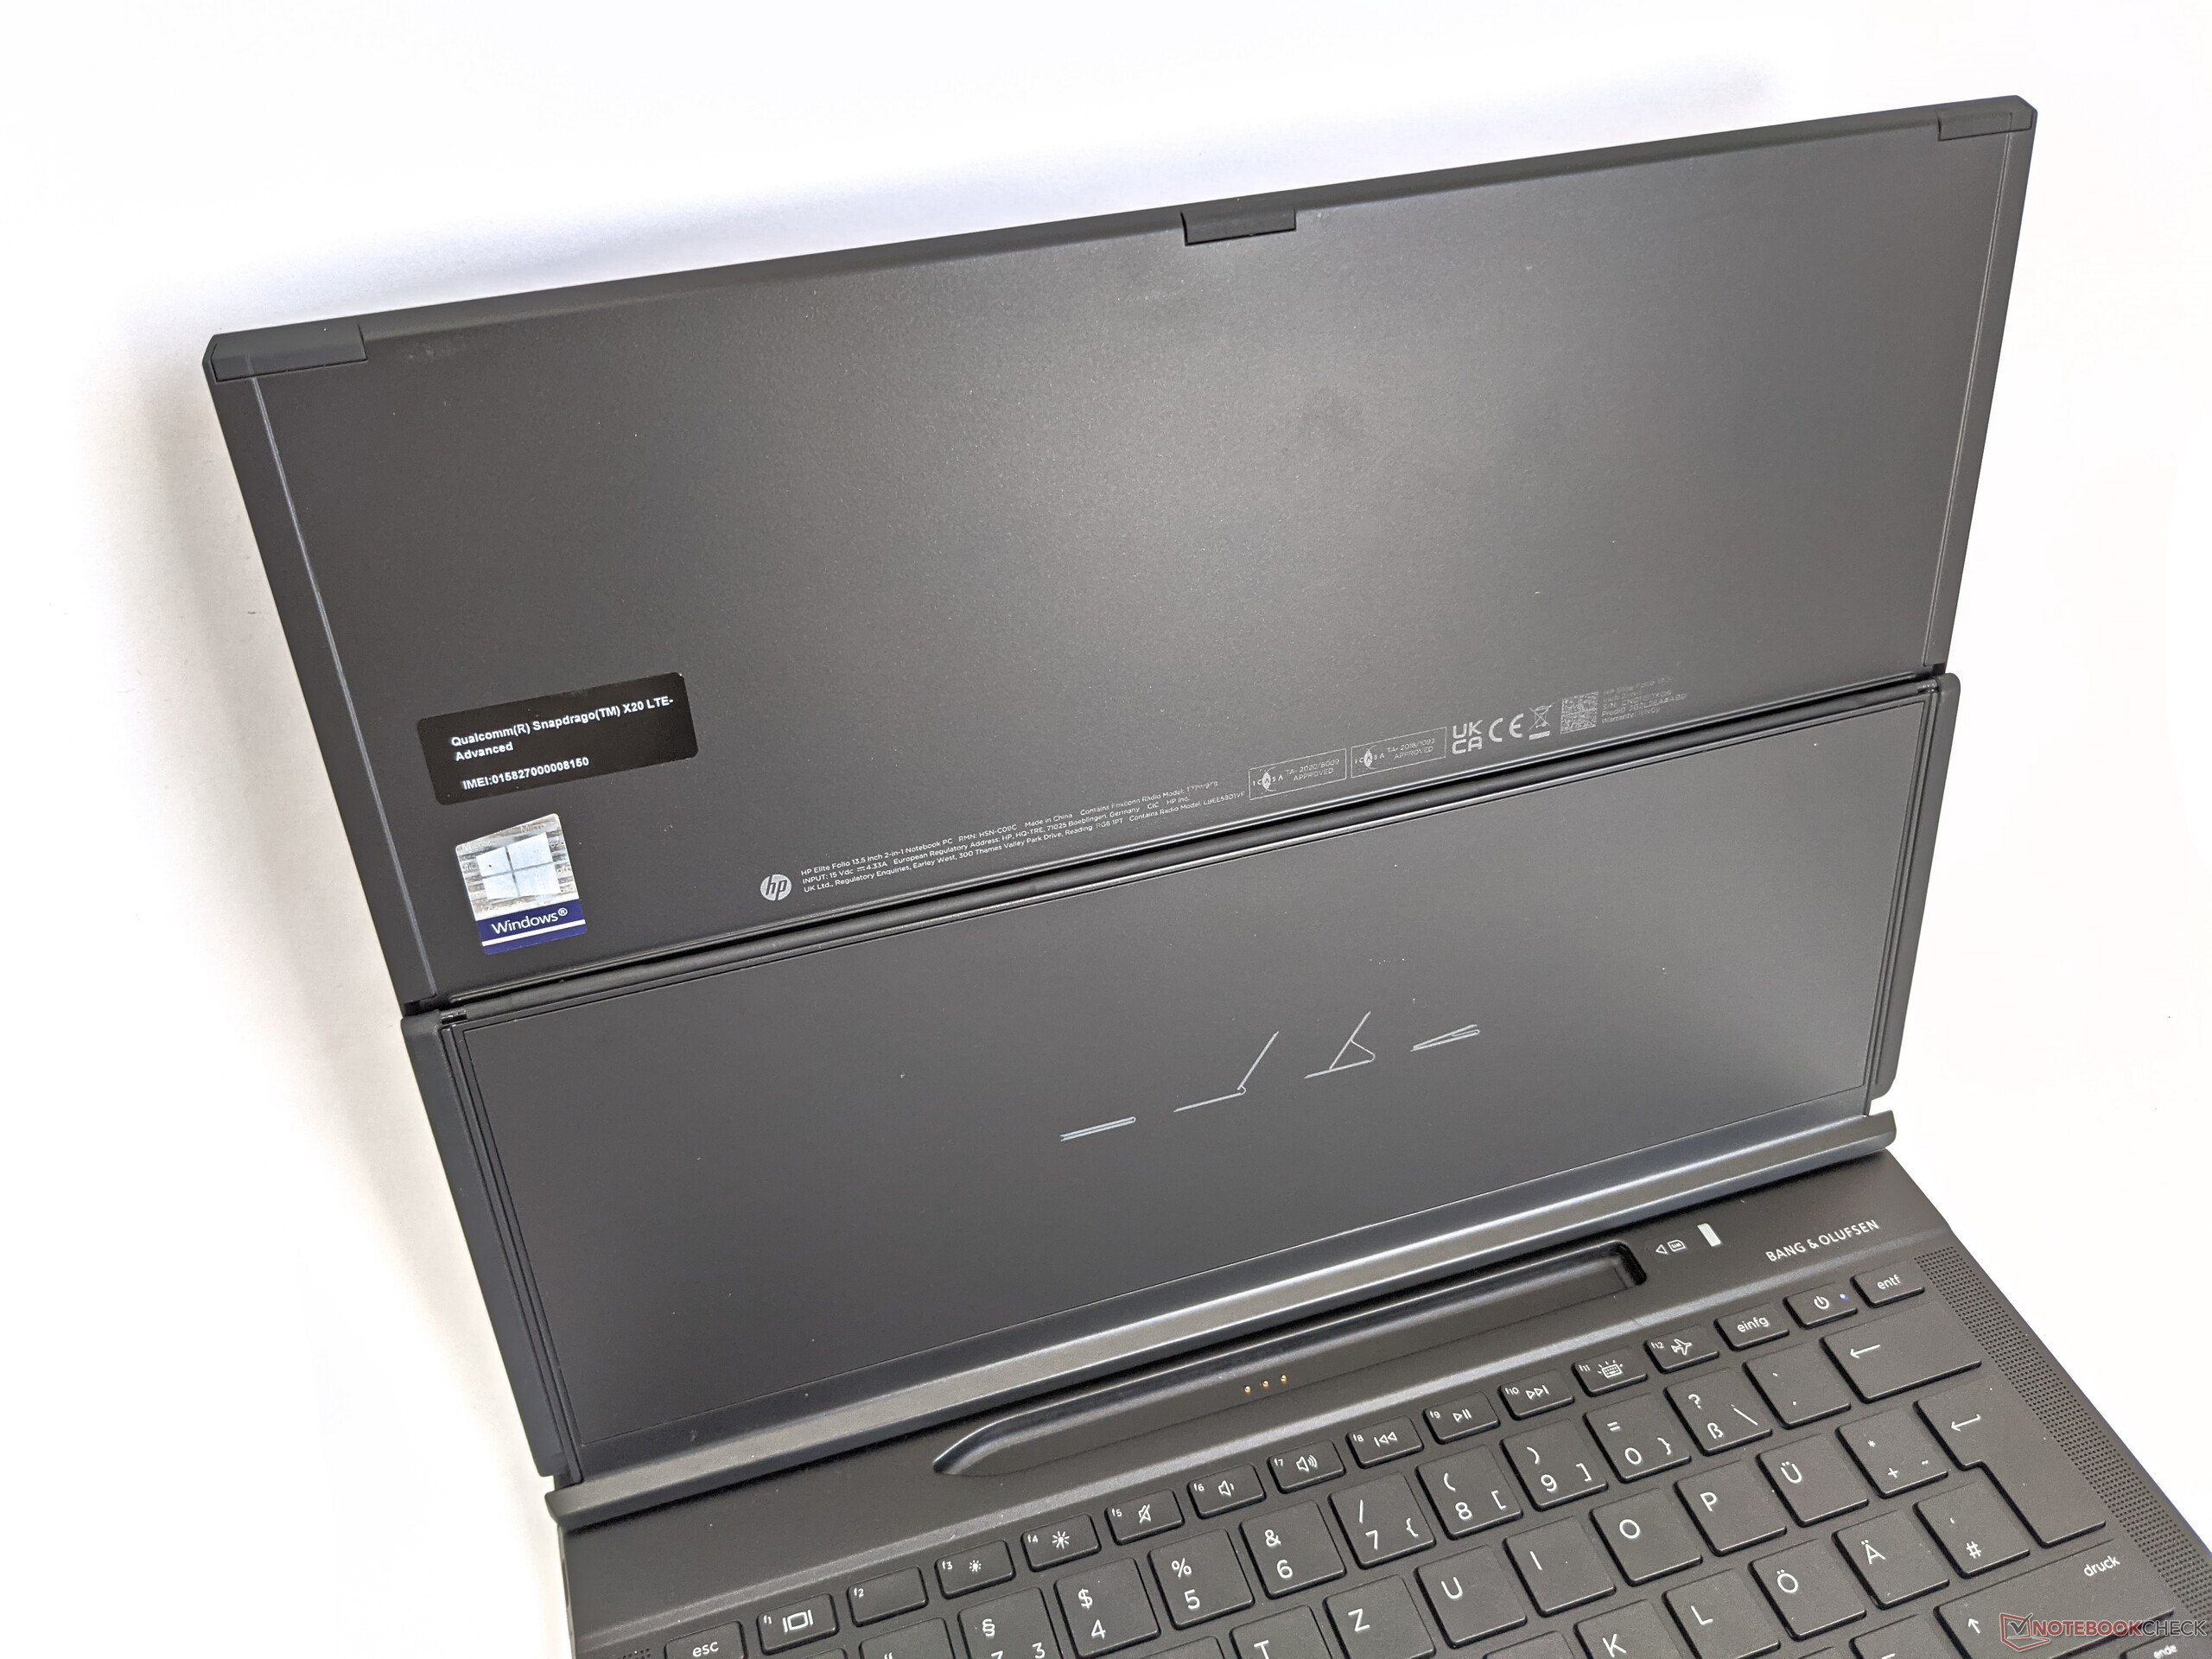 HP EliteBook Folio .5 in review: Elegant convertible with a